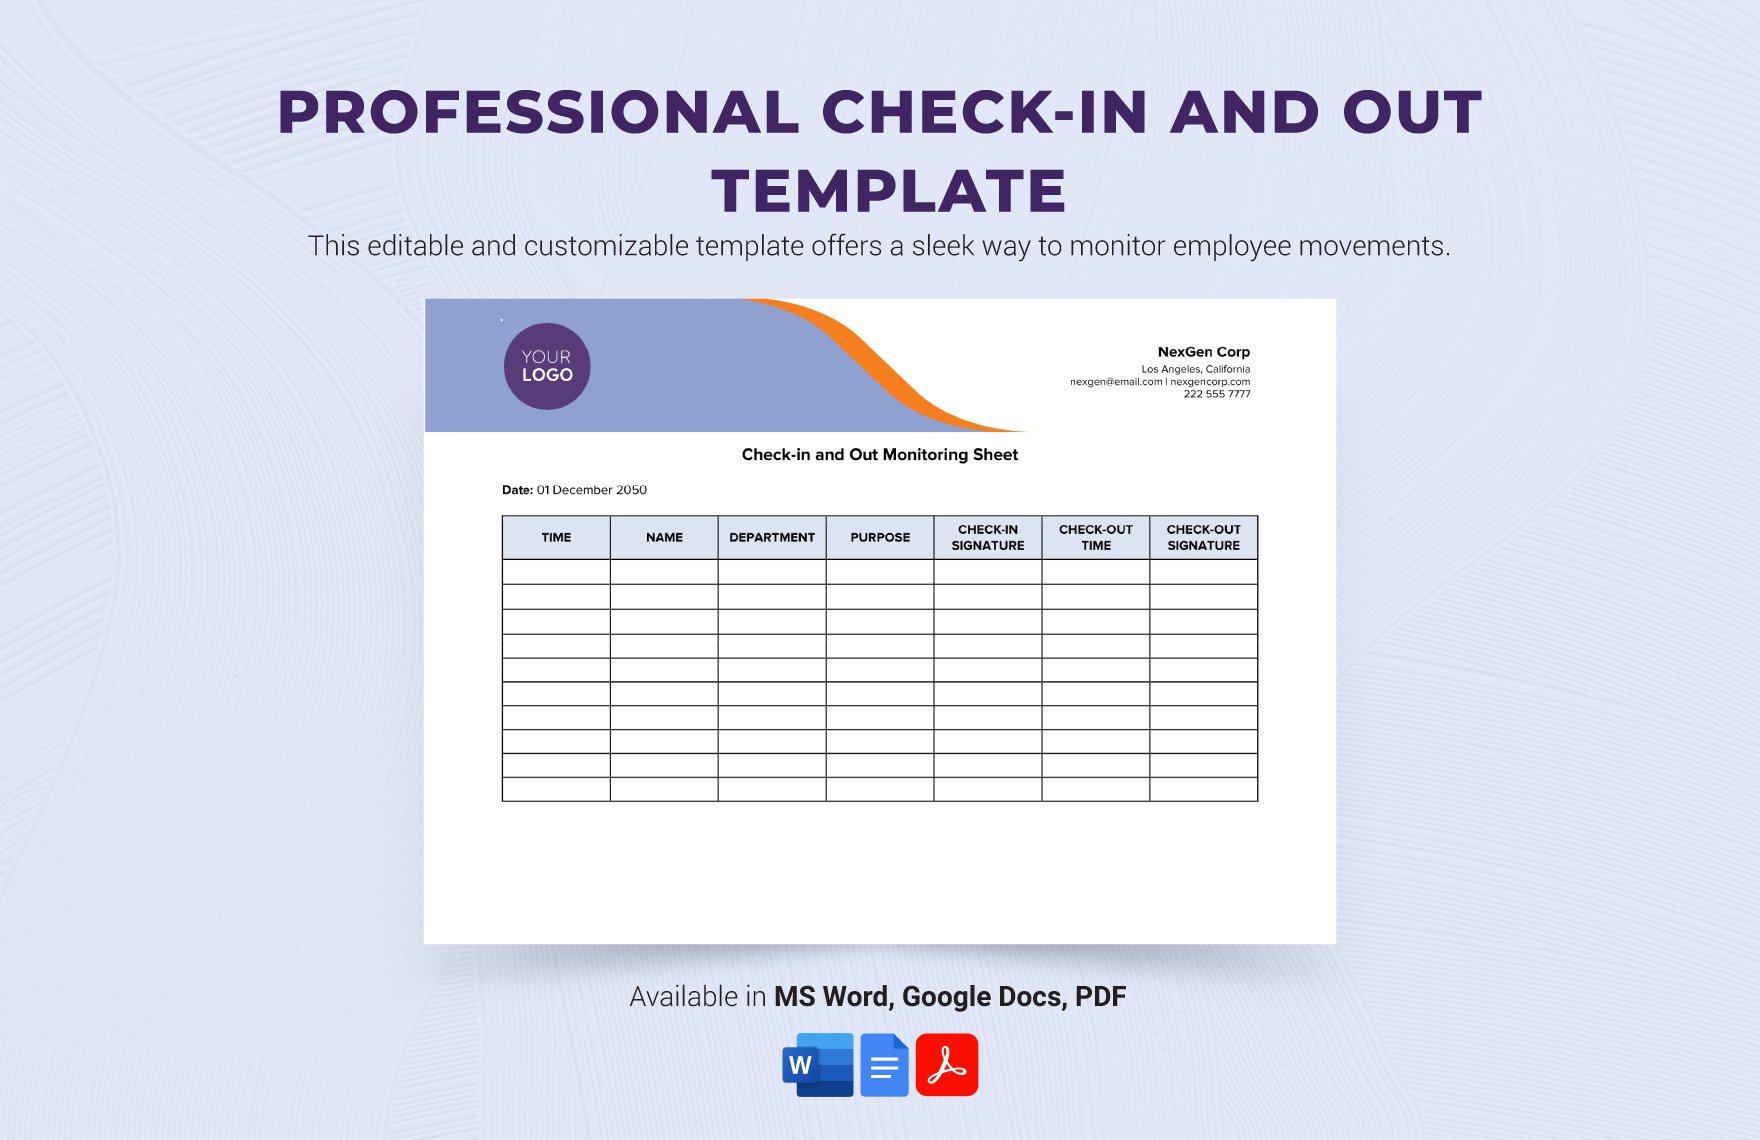 Professional Check-in and Out Template